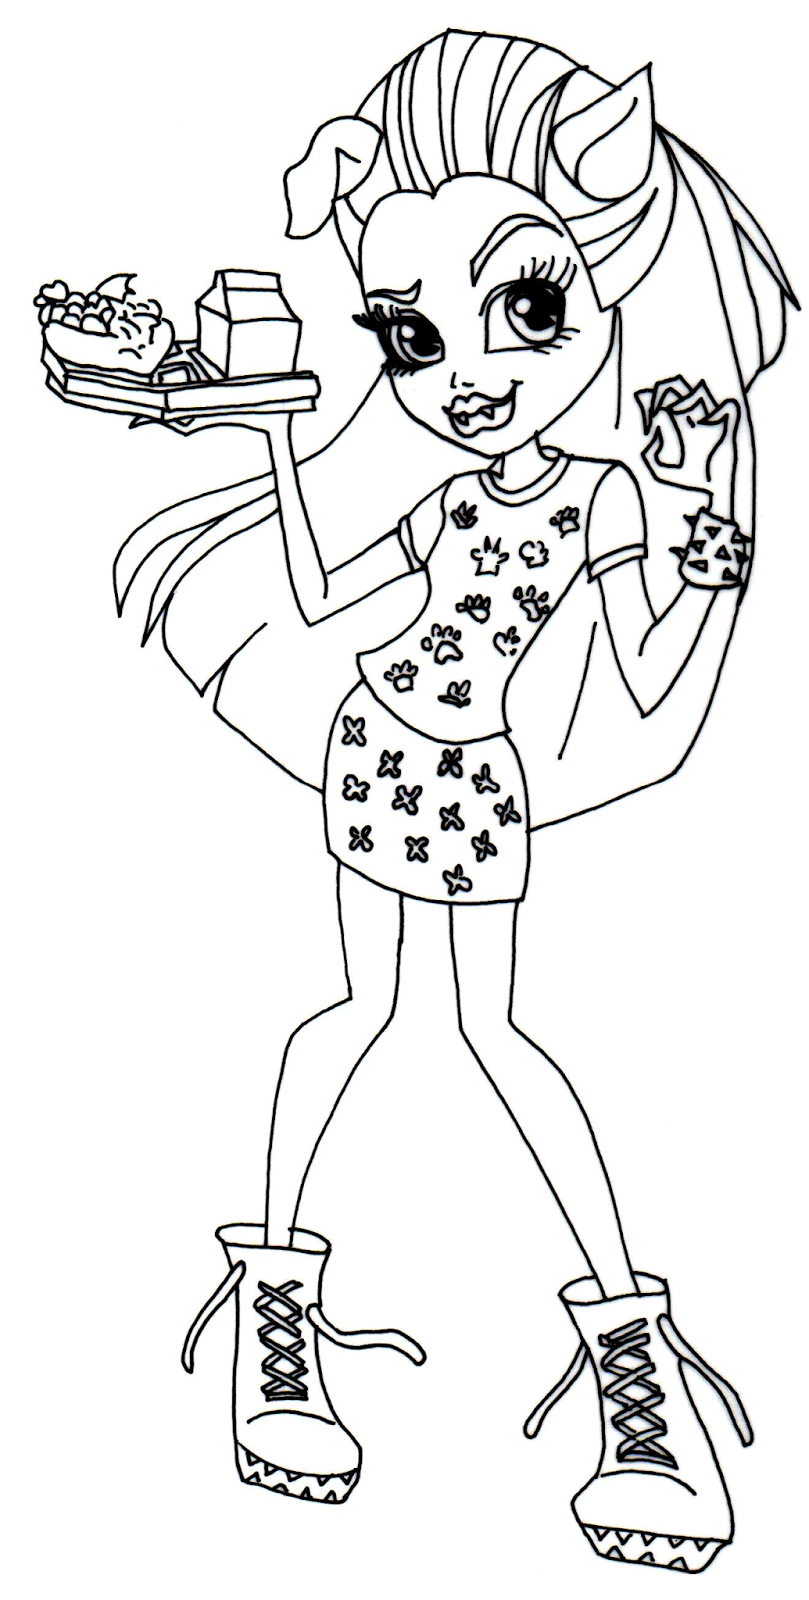 Download Free Printable Monster High Coloring Pages: June 2014